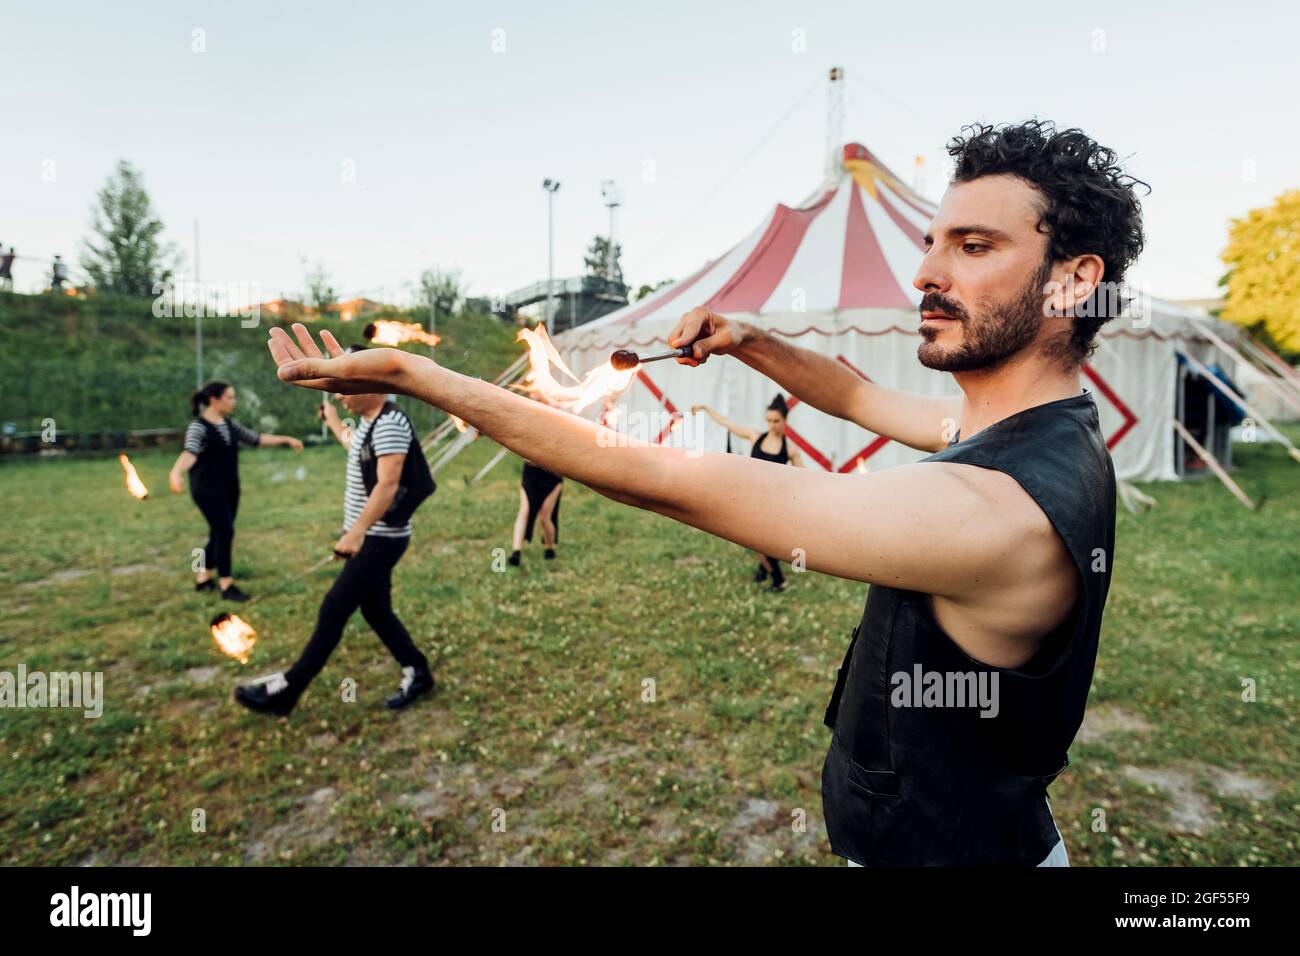 Male fire dancer doing rehearsal outside circus tent Stock Photo